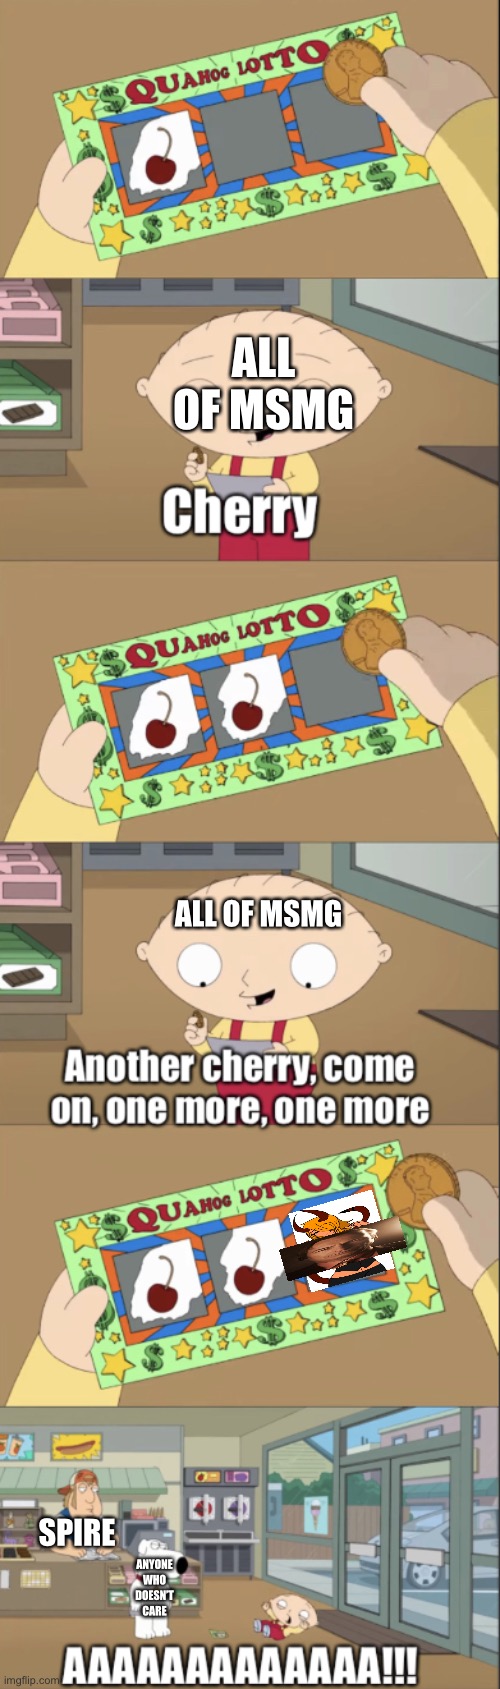 Stewie scratch card | ALL OF MSMG; ALL OF MSMG; SPIRE; ANYONE WHO DOESN’T CARE | image tagged in stewie scratch card | made w/ Imgflip meme maker